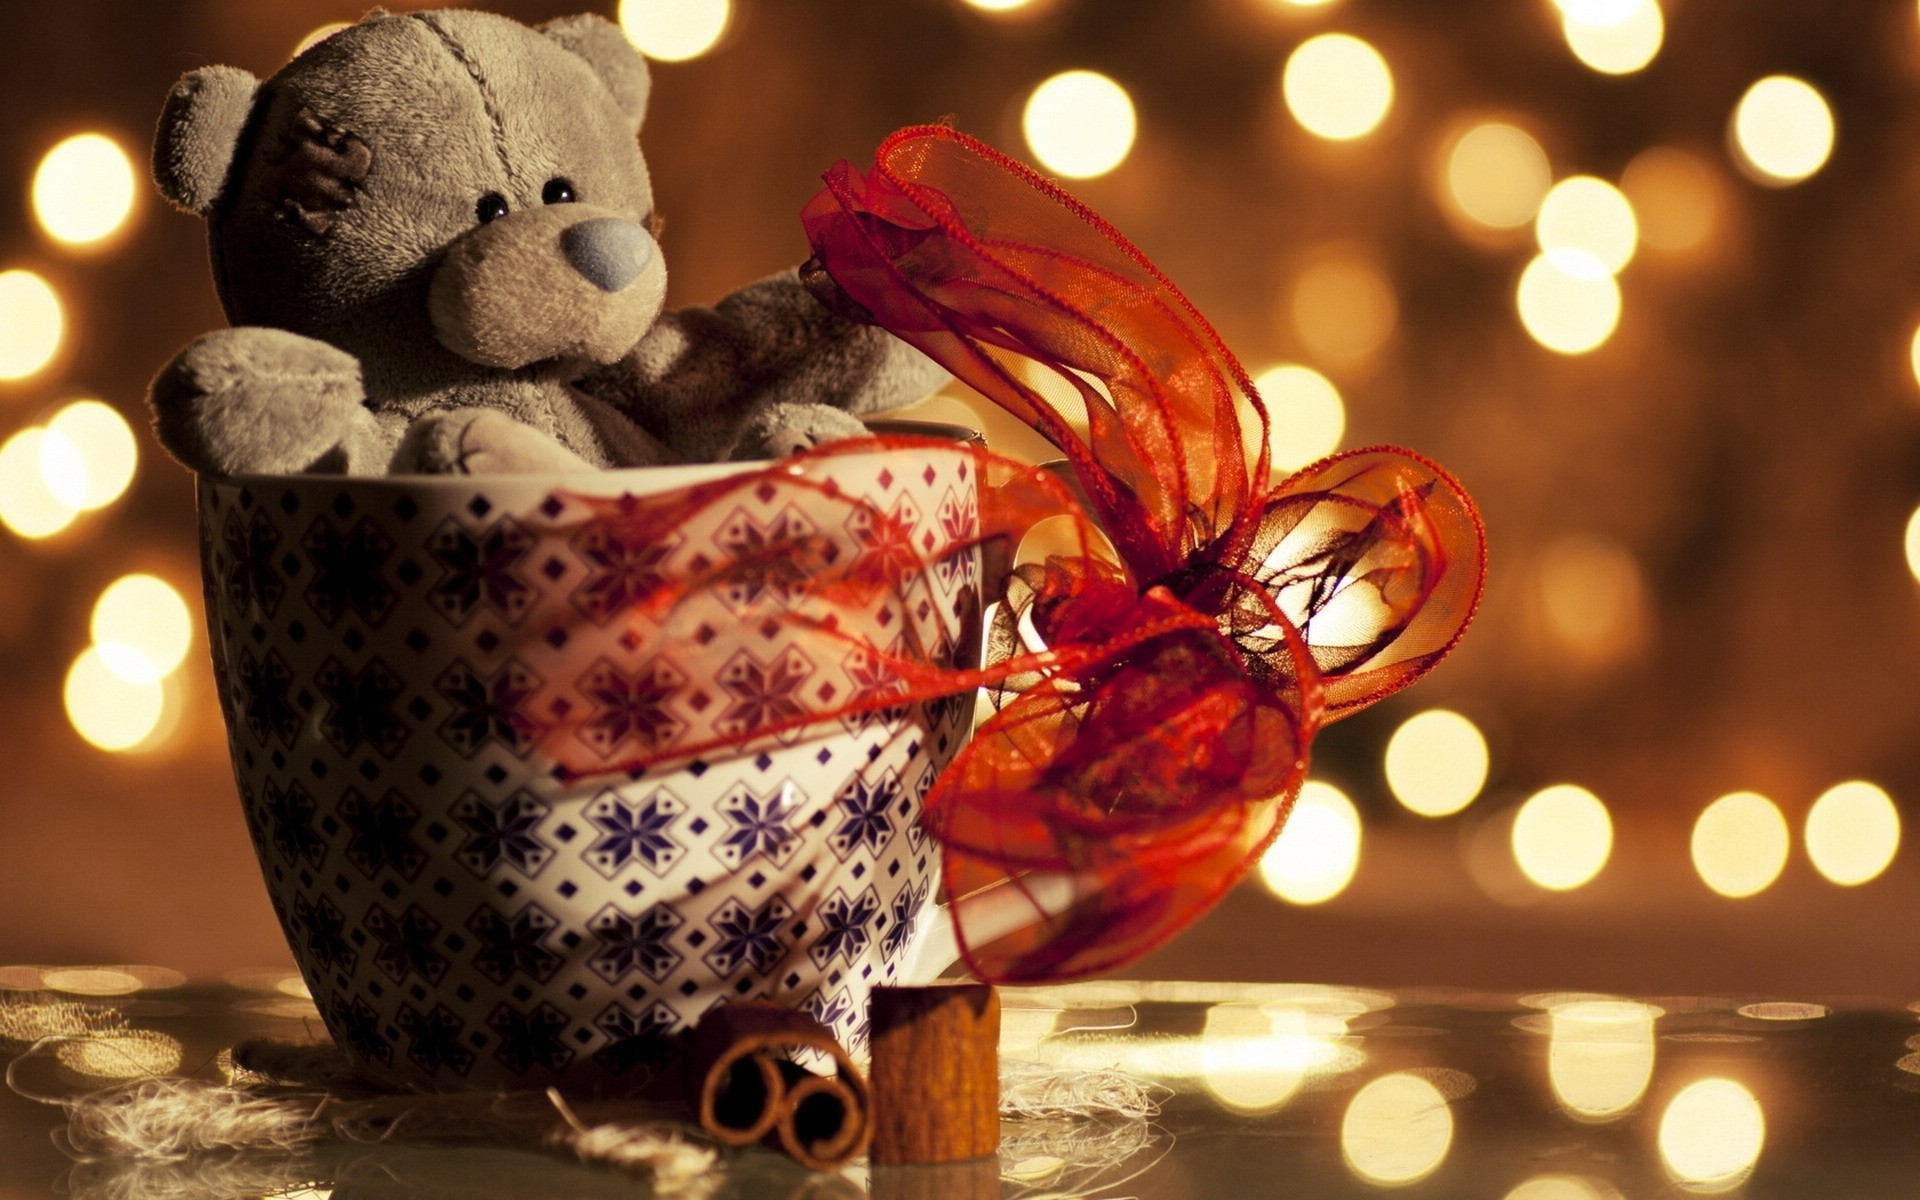 1920x1200 Christmas, Gift, Teddy, Bear, Beautiful, Moods, Wallpaper, Desktop  Wallpapers, Cool, Home Images, Garden, Healthy Life, Shed, Stock Photos,  High Resolution, ...